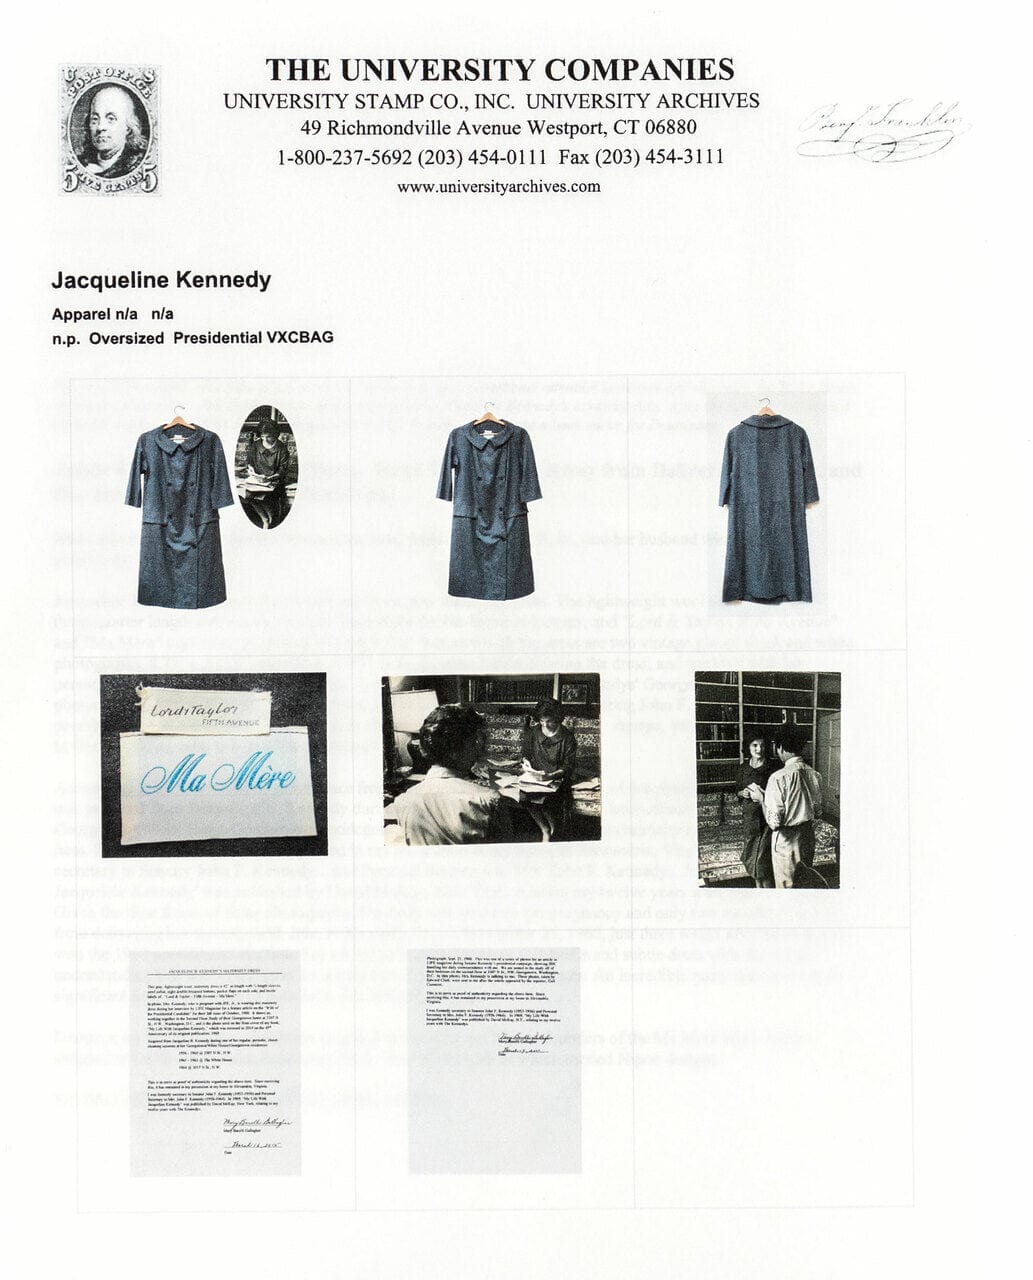 Jackie Kennedy Maternity Dress certificate of authority. As seen on Pawn Stars.